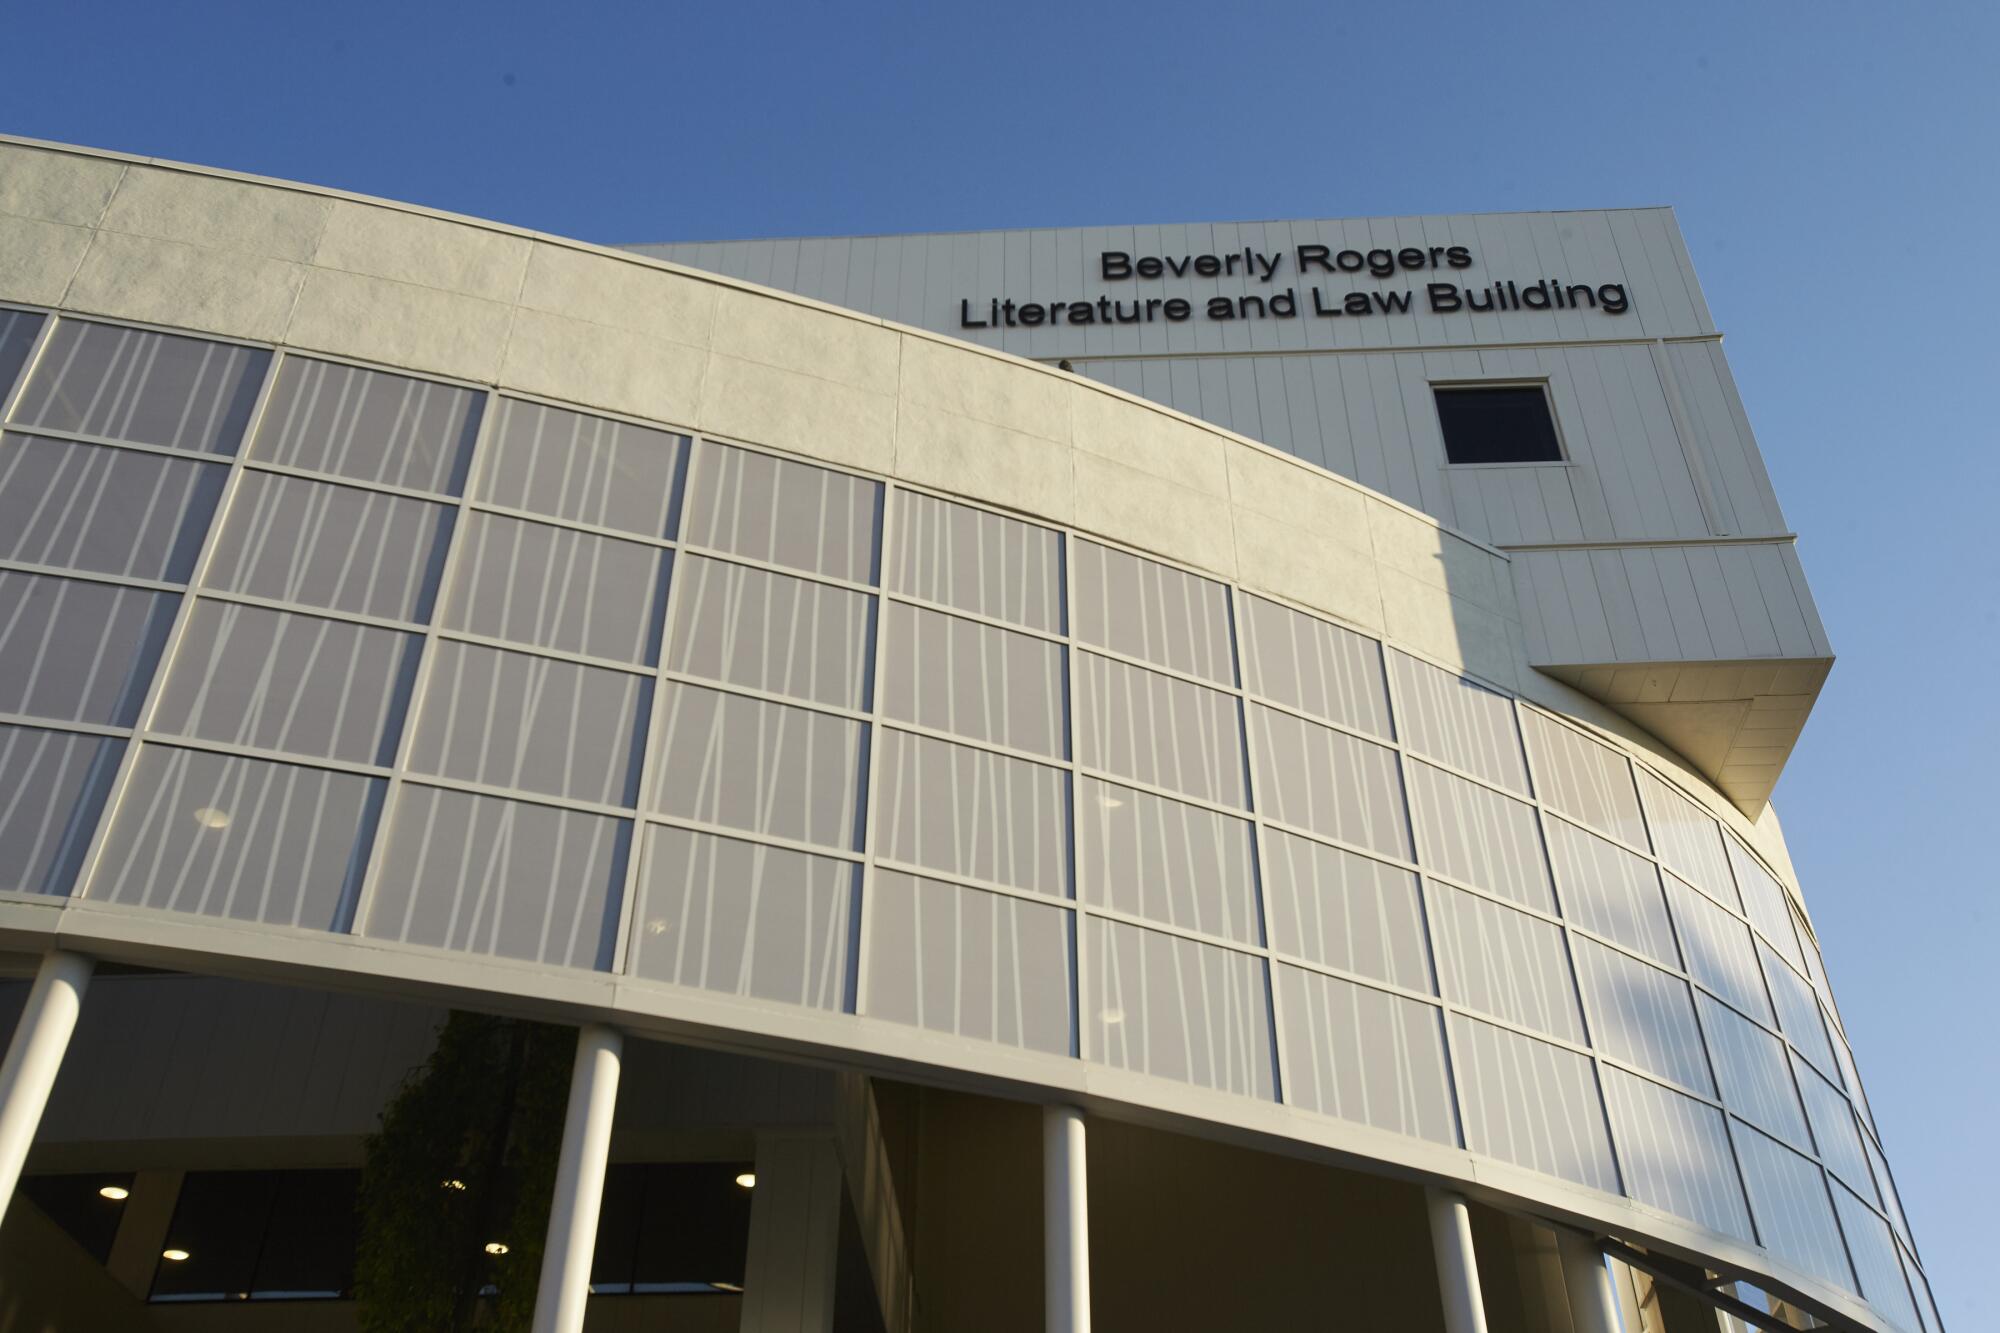 A building with the words "Beverly Rogers Literature and Law Building" on it